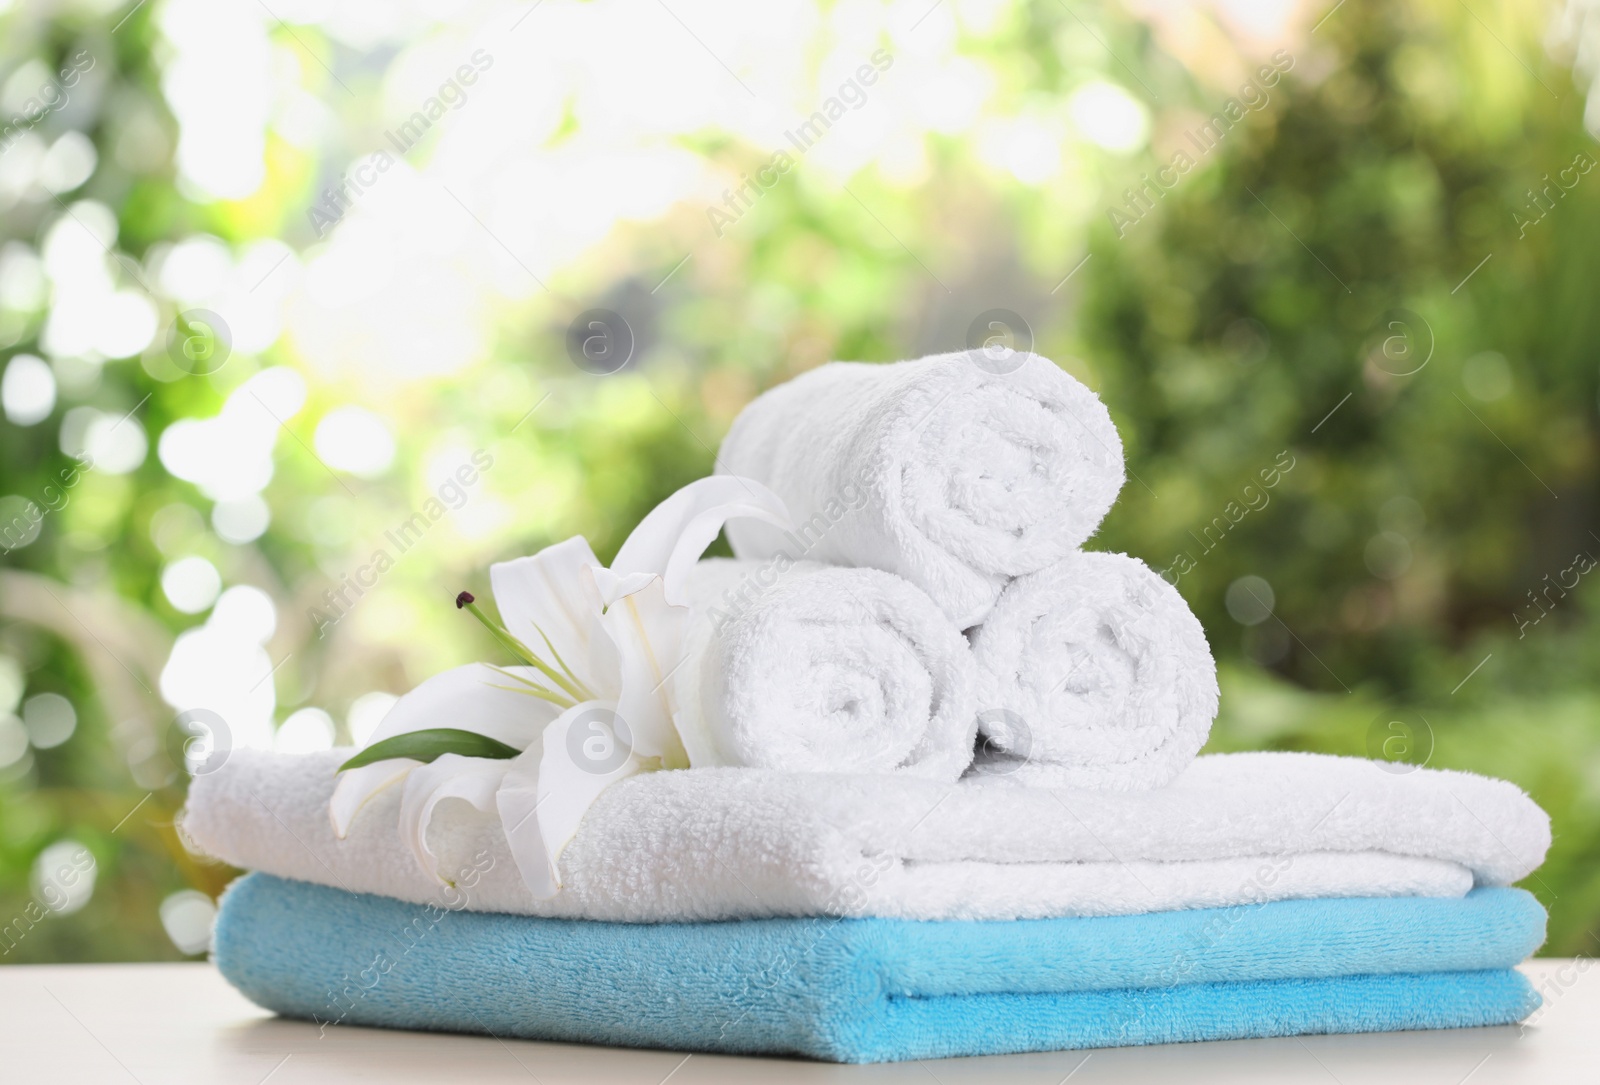 Photo of Soft bath towels and flower on table against blurred background